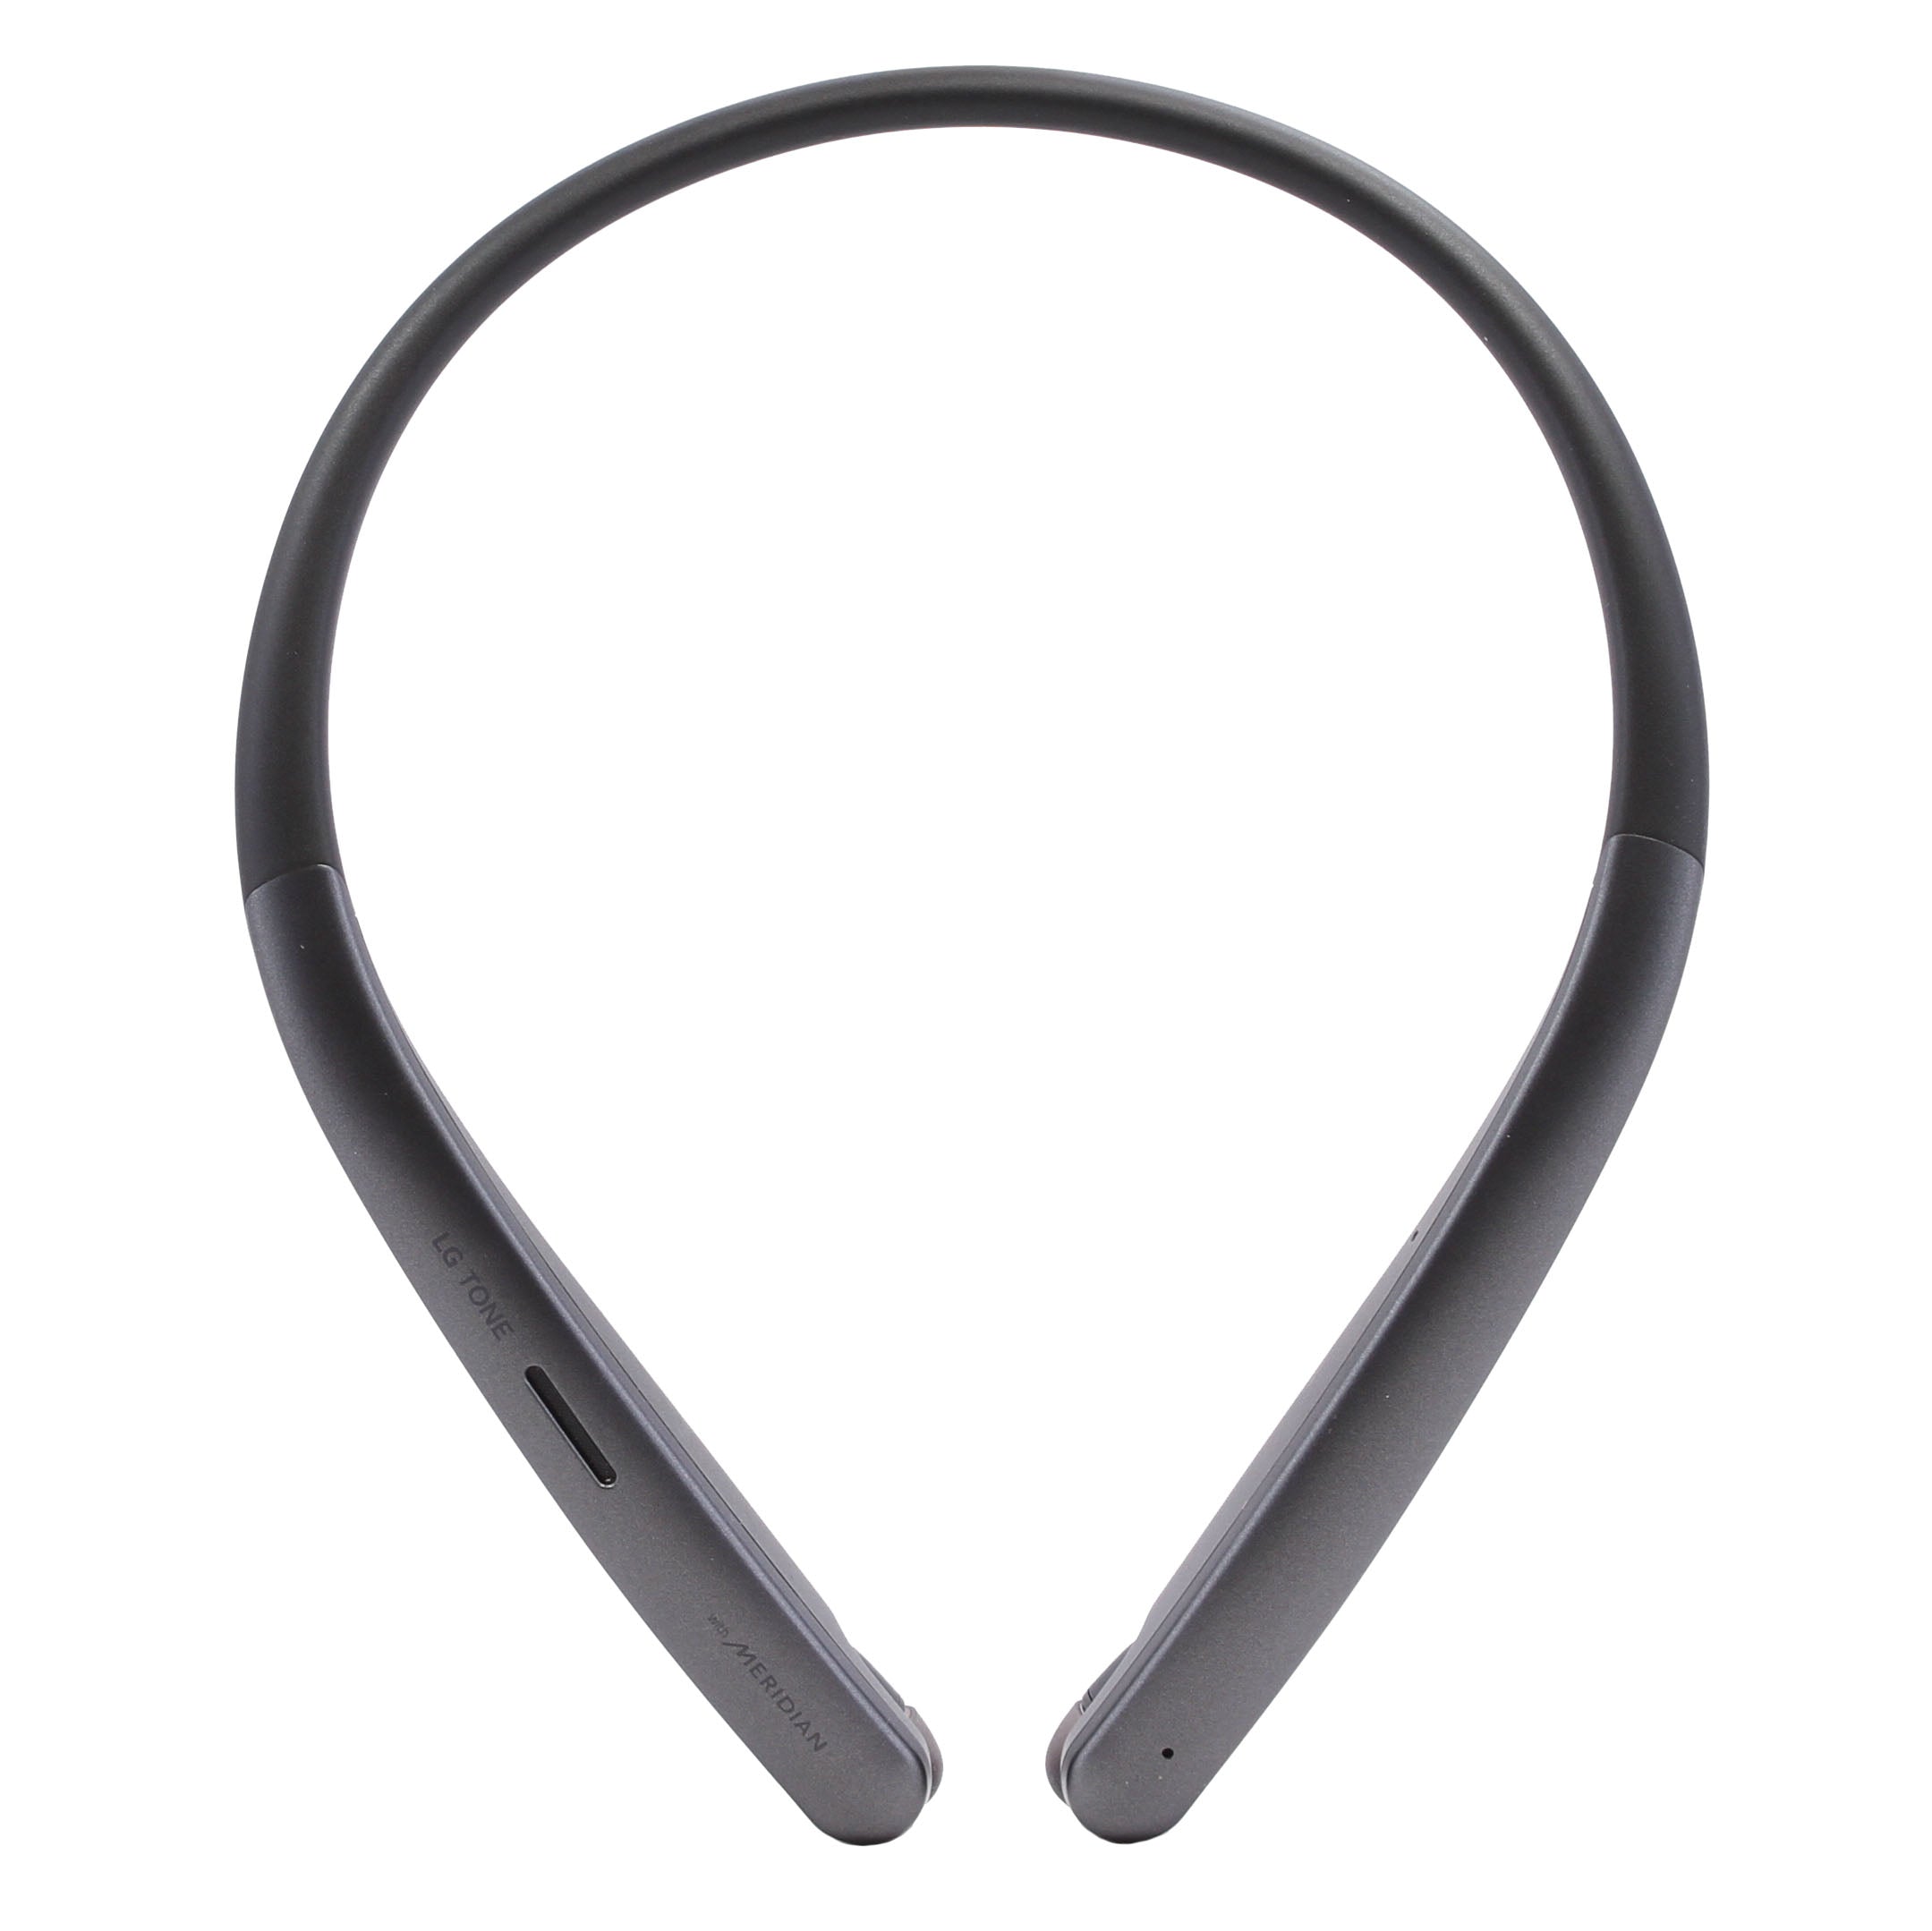 LG TONE Style HBS-SL6S Bluetooth Wireless Stereo Headset - Black (Certified Refurbished)